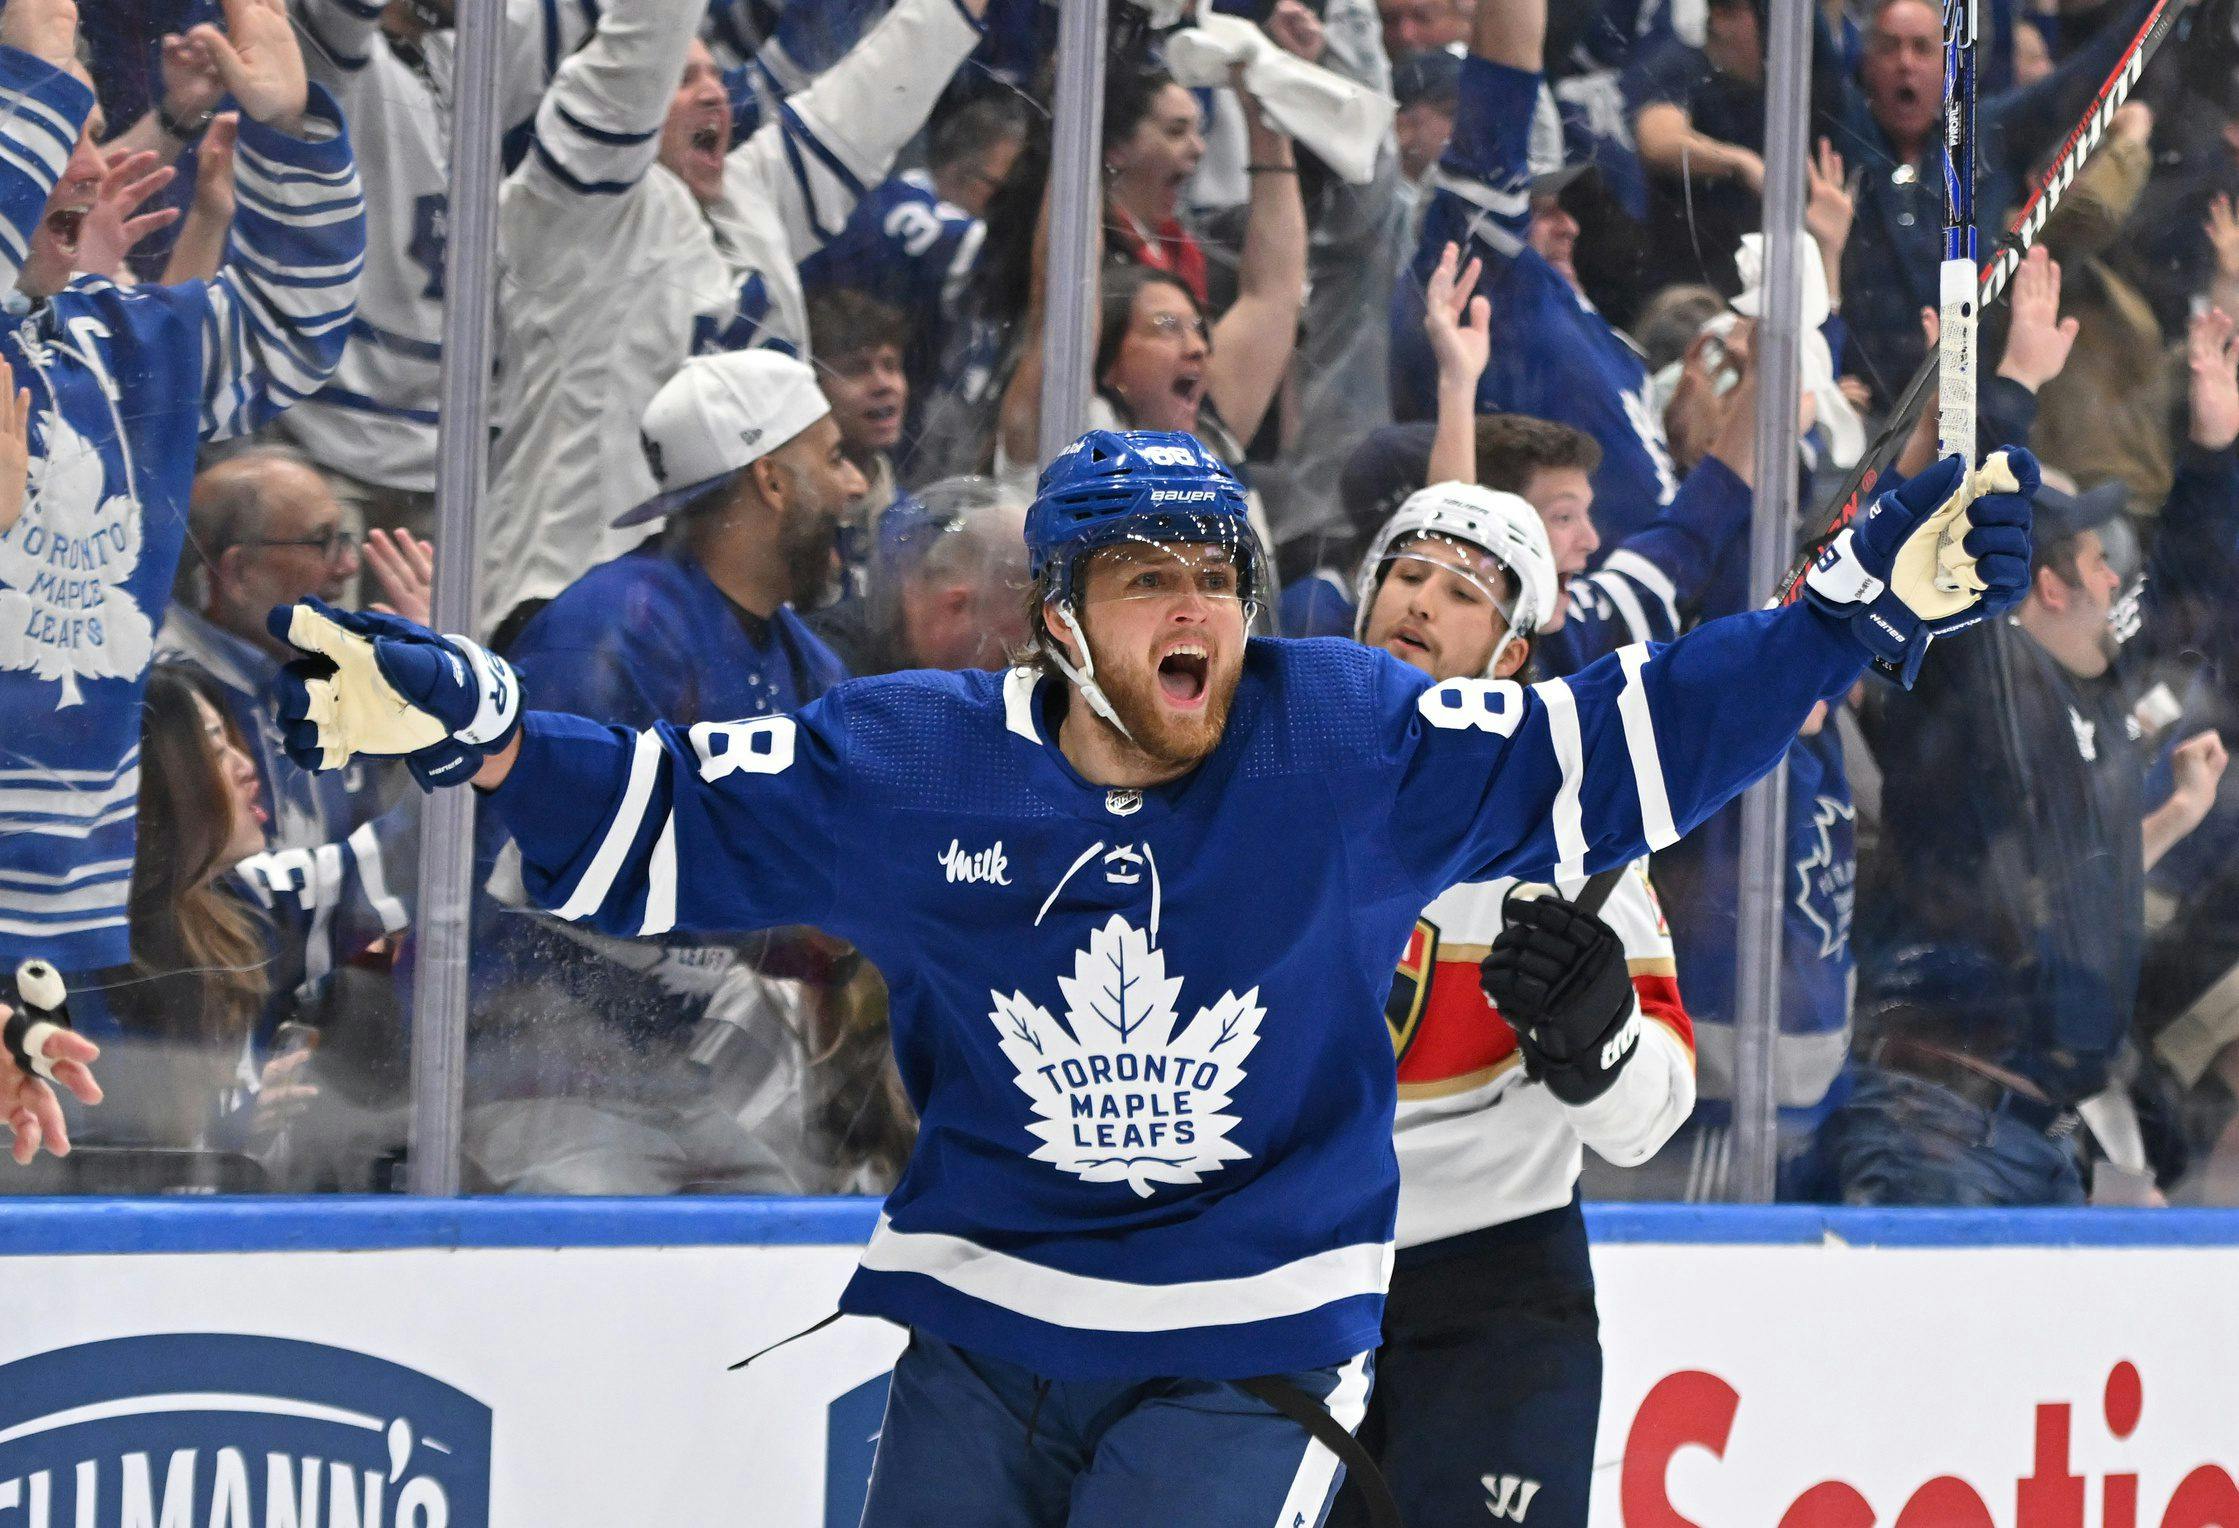 No Leafs star can be untouchable now. Game 3 was a turning point